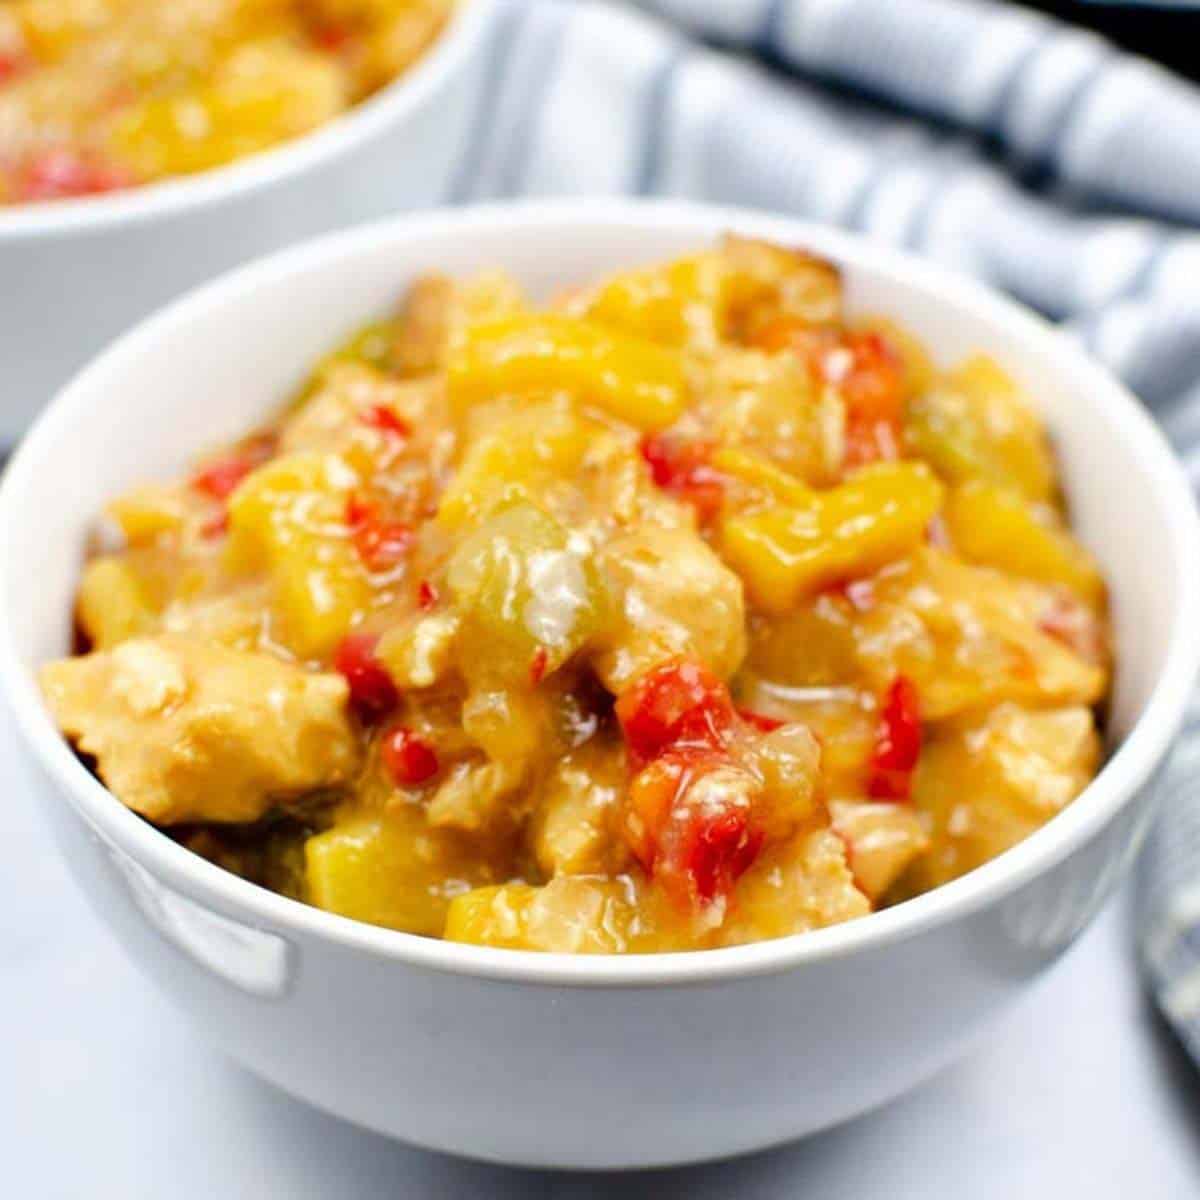 Thumbnail of low calorie sweet and sour chicken.